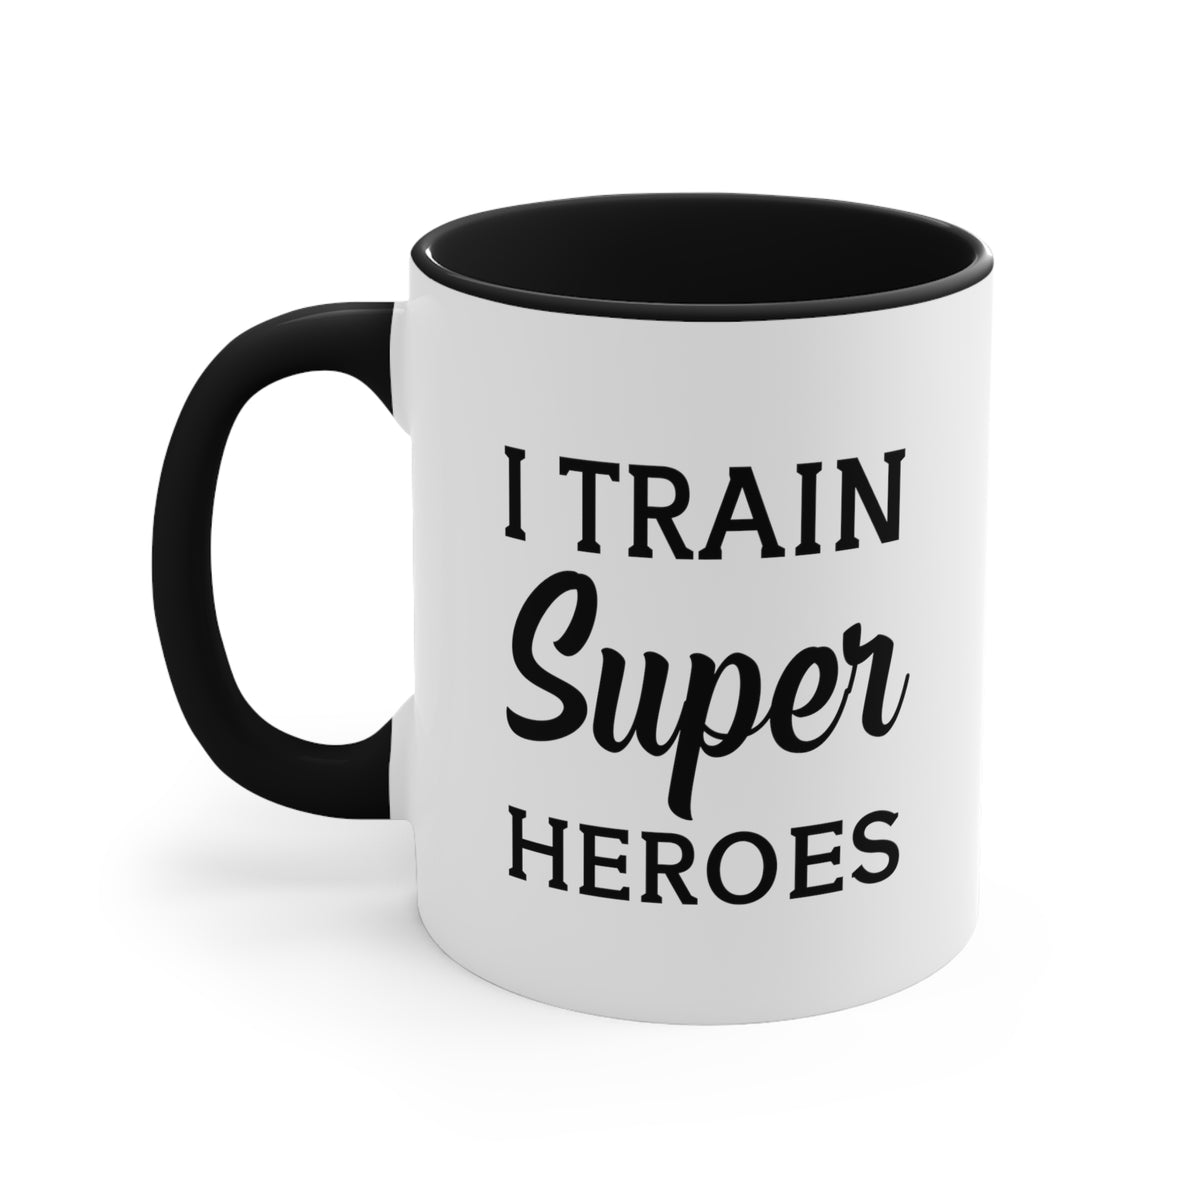 Personal Trainer Gifts - I Train Super Heroes Two Tone Coffee Mug - Gifts For Athletic Trainer Fitness Trainer Men Women